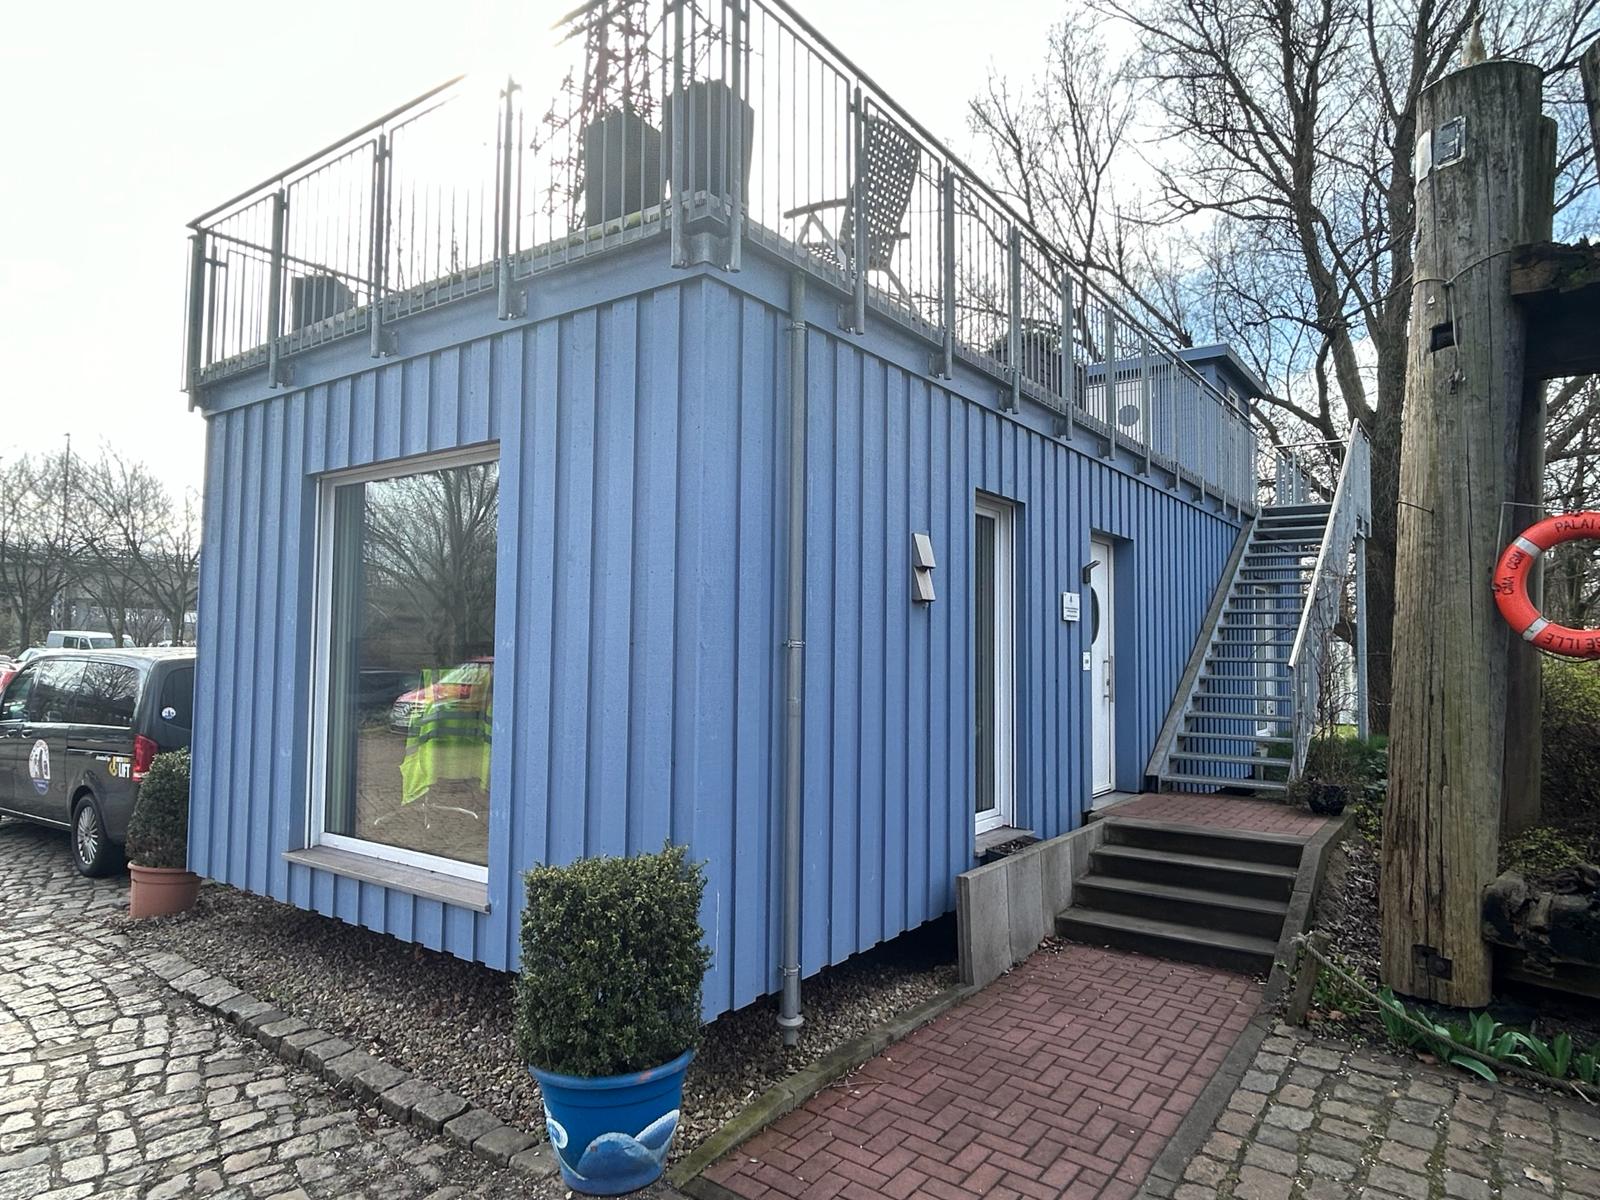 A smallish blue prefabricated office building. The building is single storey with steps up to a balcony garden on the flat roof with plants and garden furniture. 